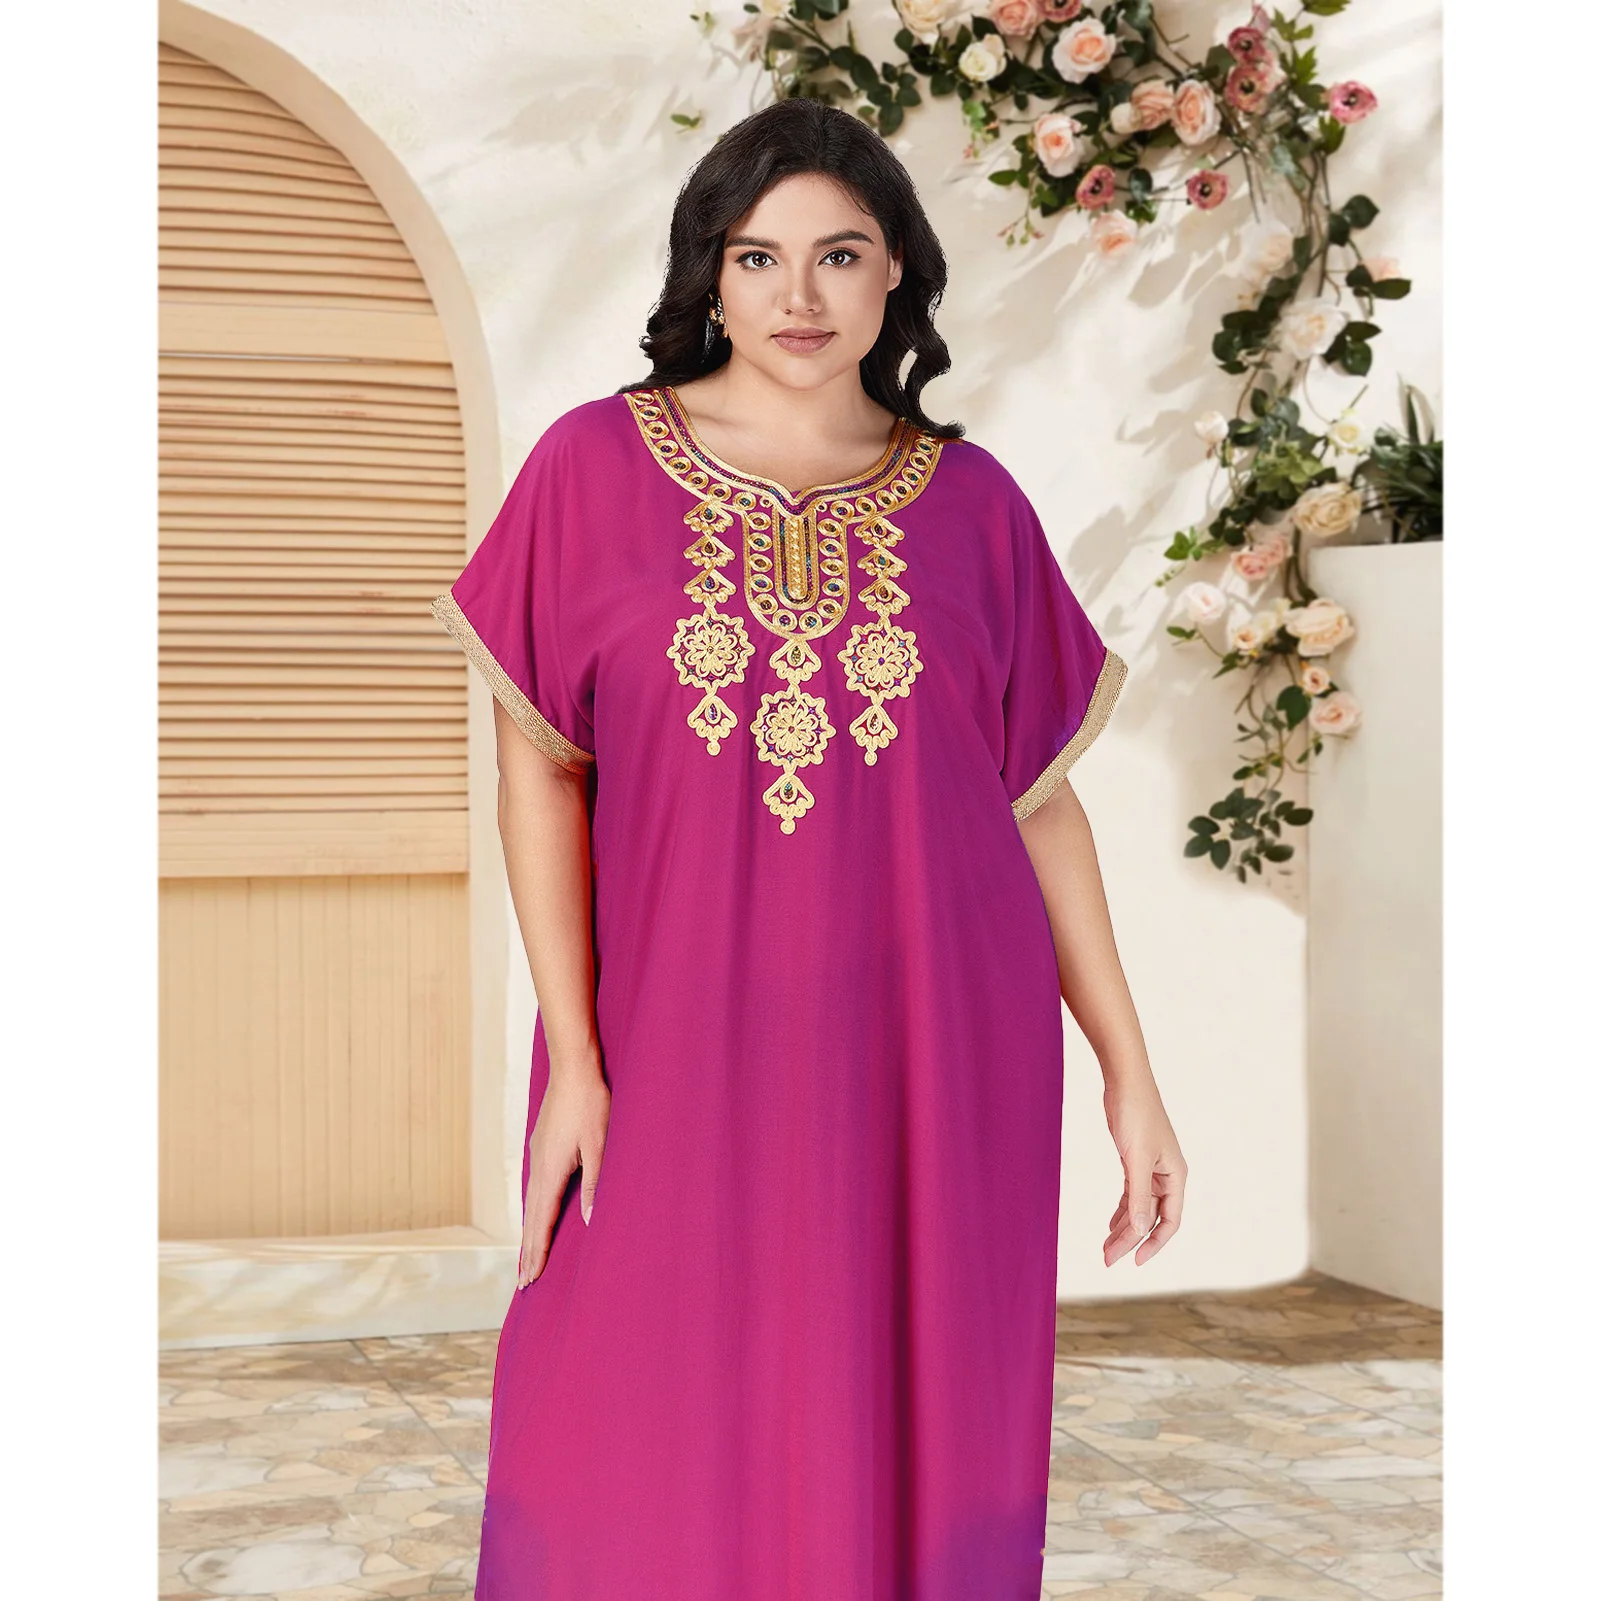 

New African Traditional Dress Plus Size Short Sleeve Abaya for Women's Kaftan Casual Home Dashiki Loungewear Cover up